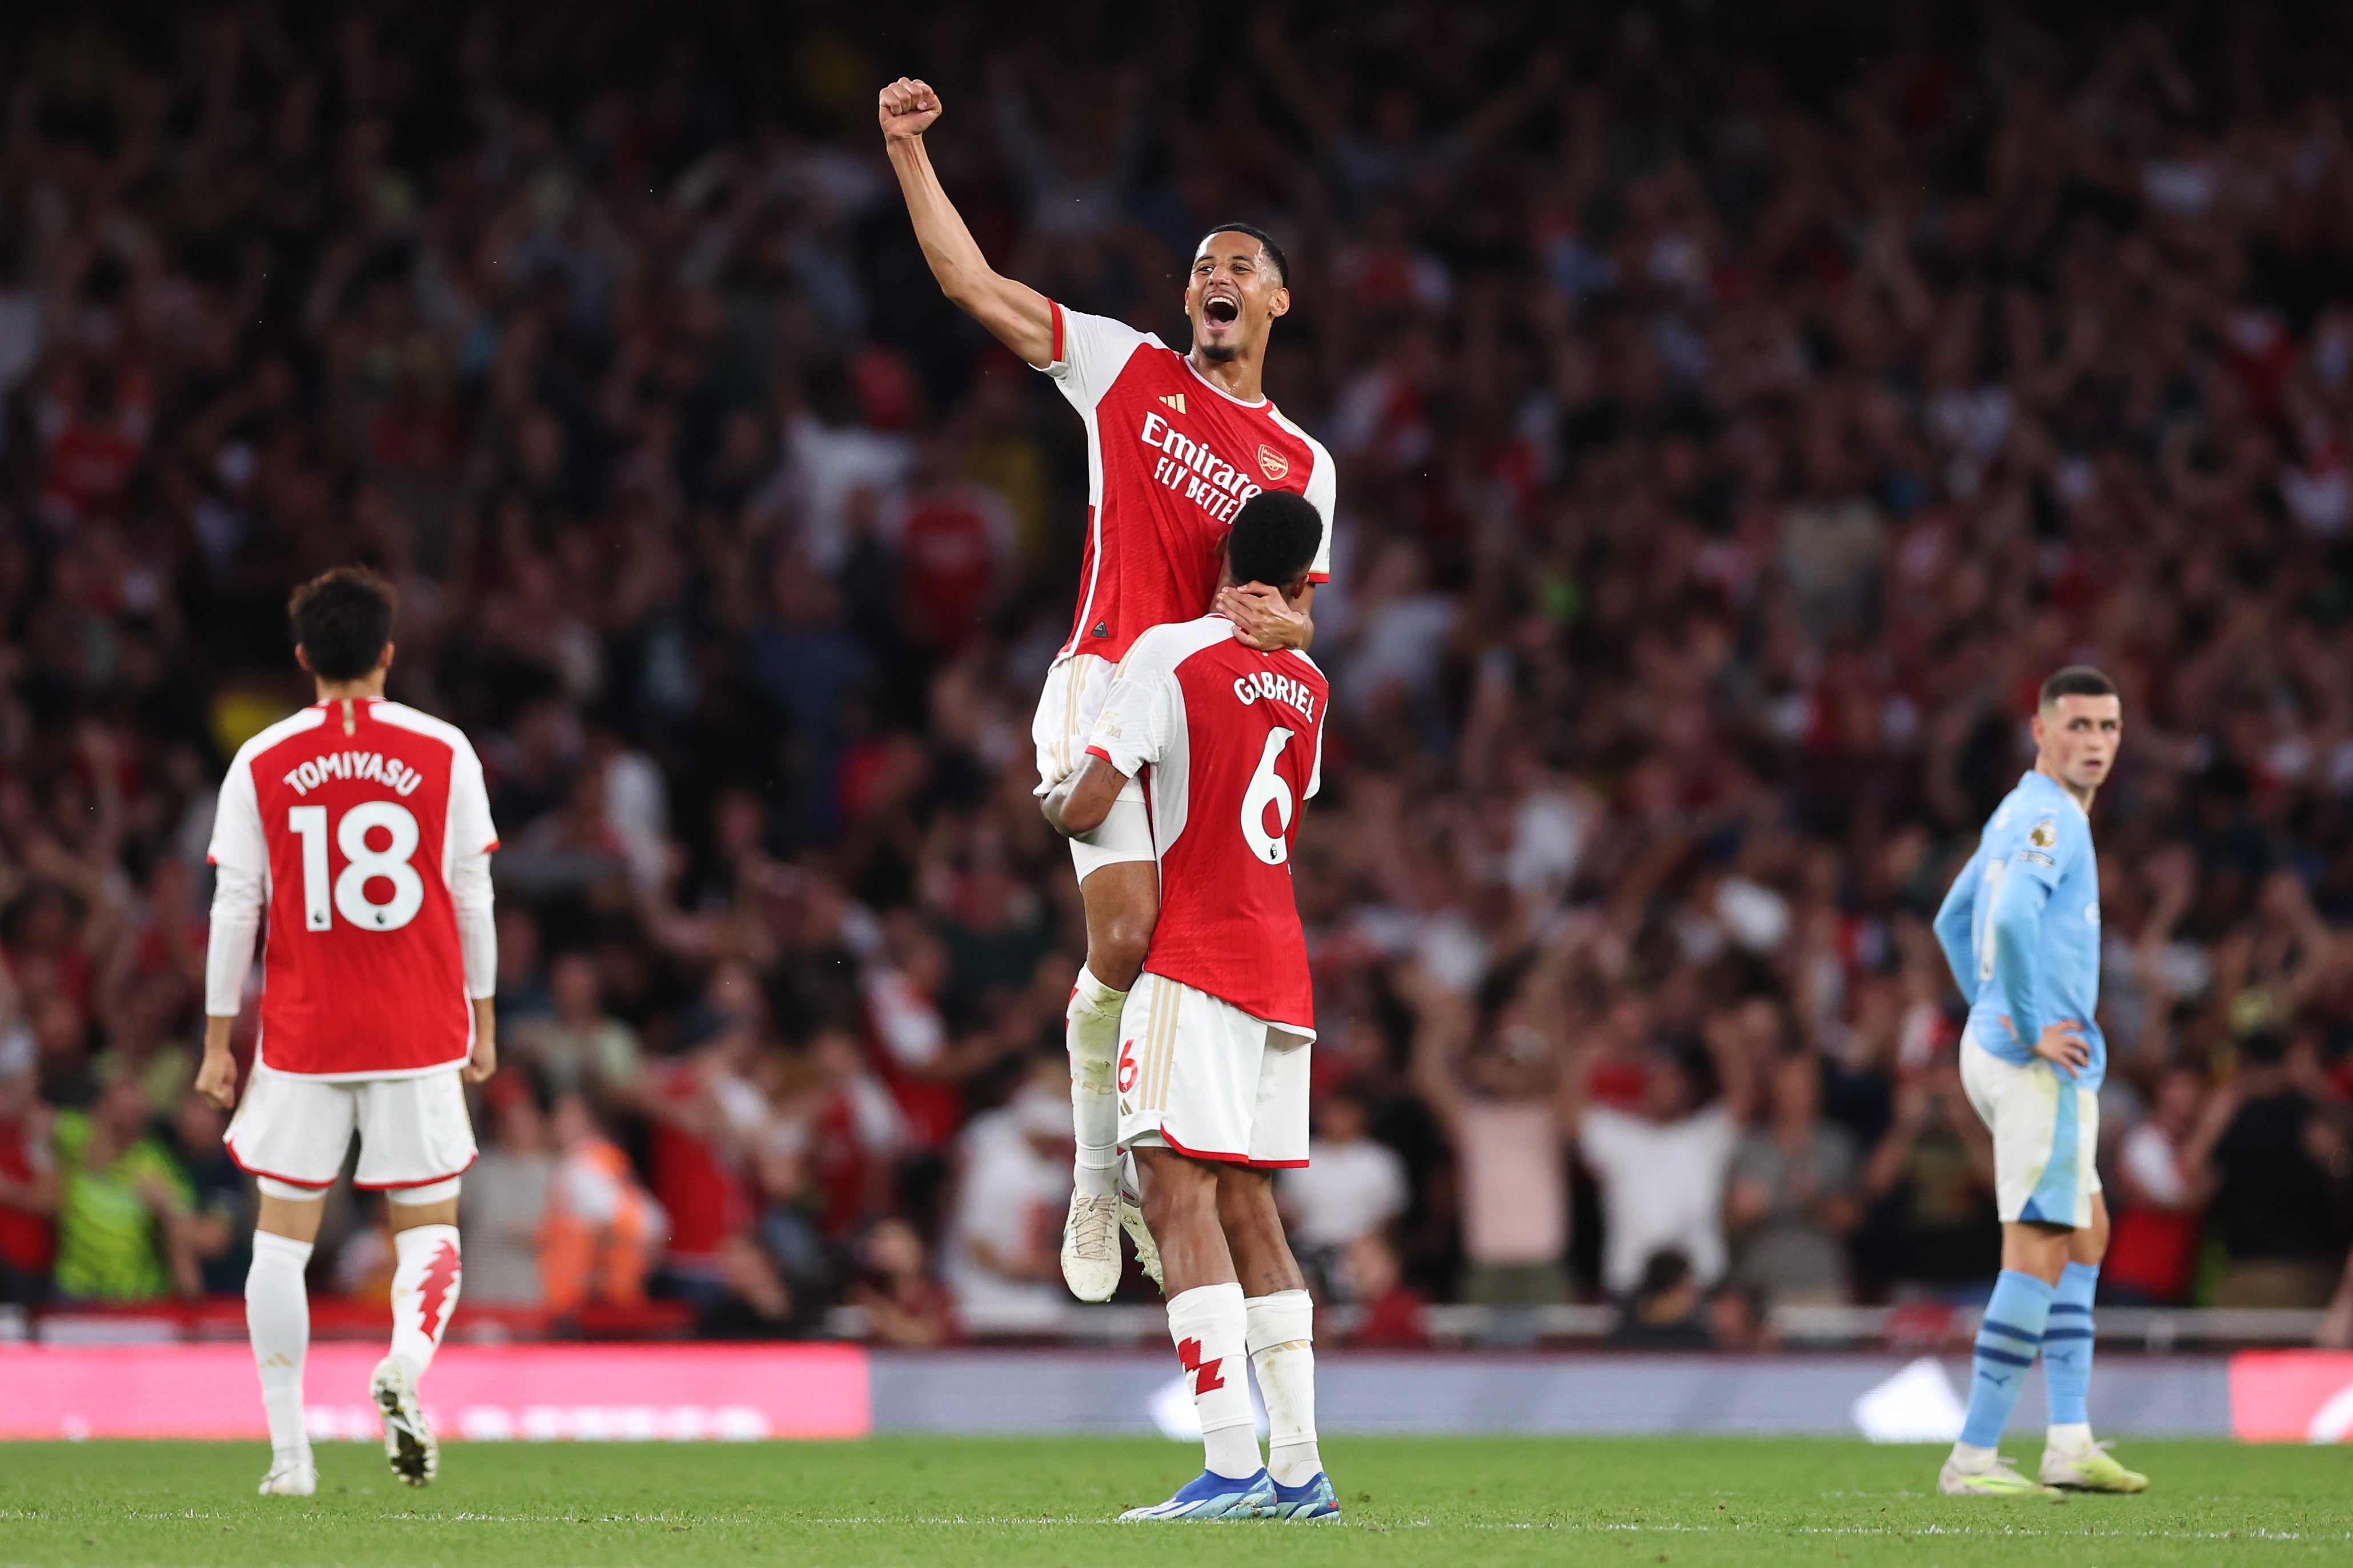 Arsenal secured a 1-0 victory over Manchester City